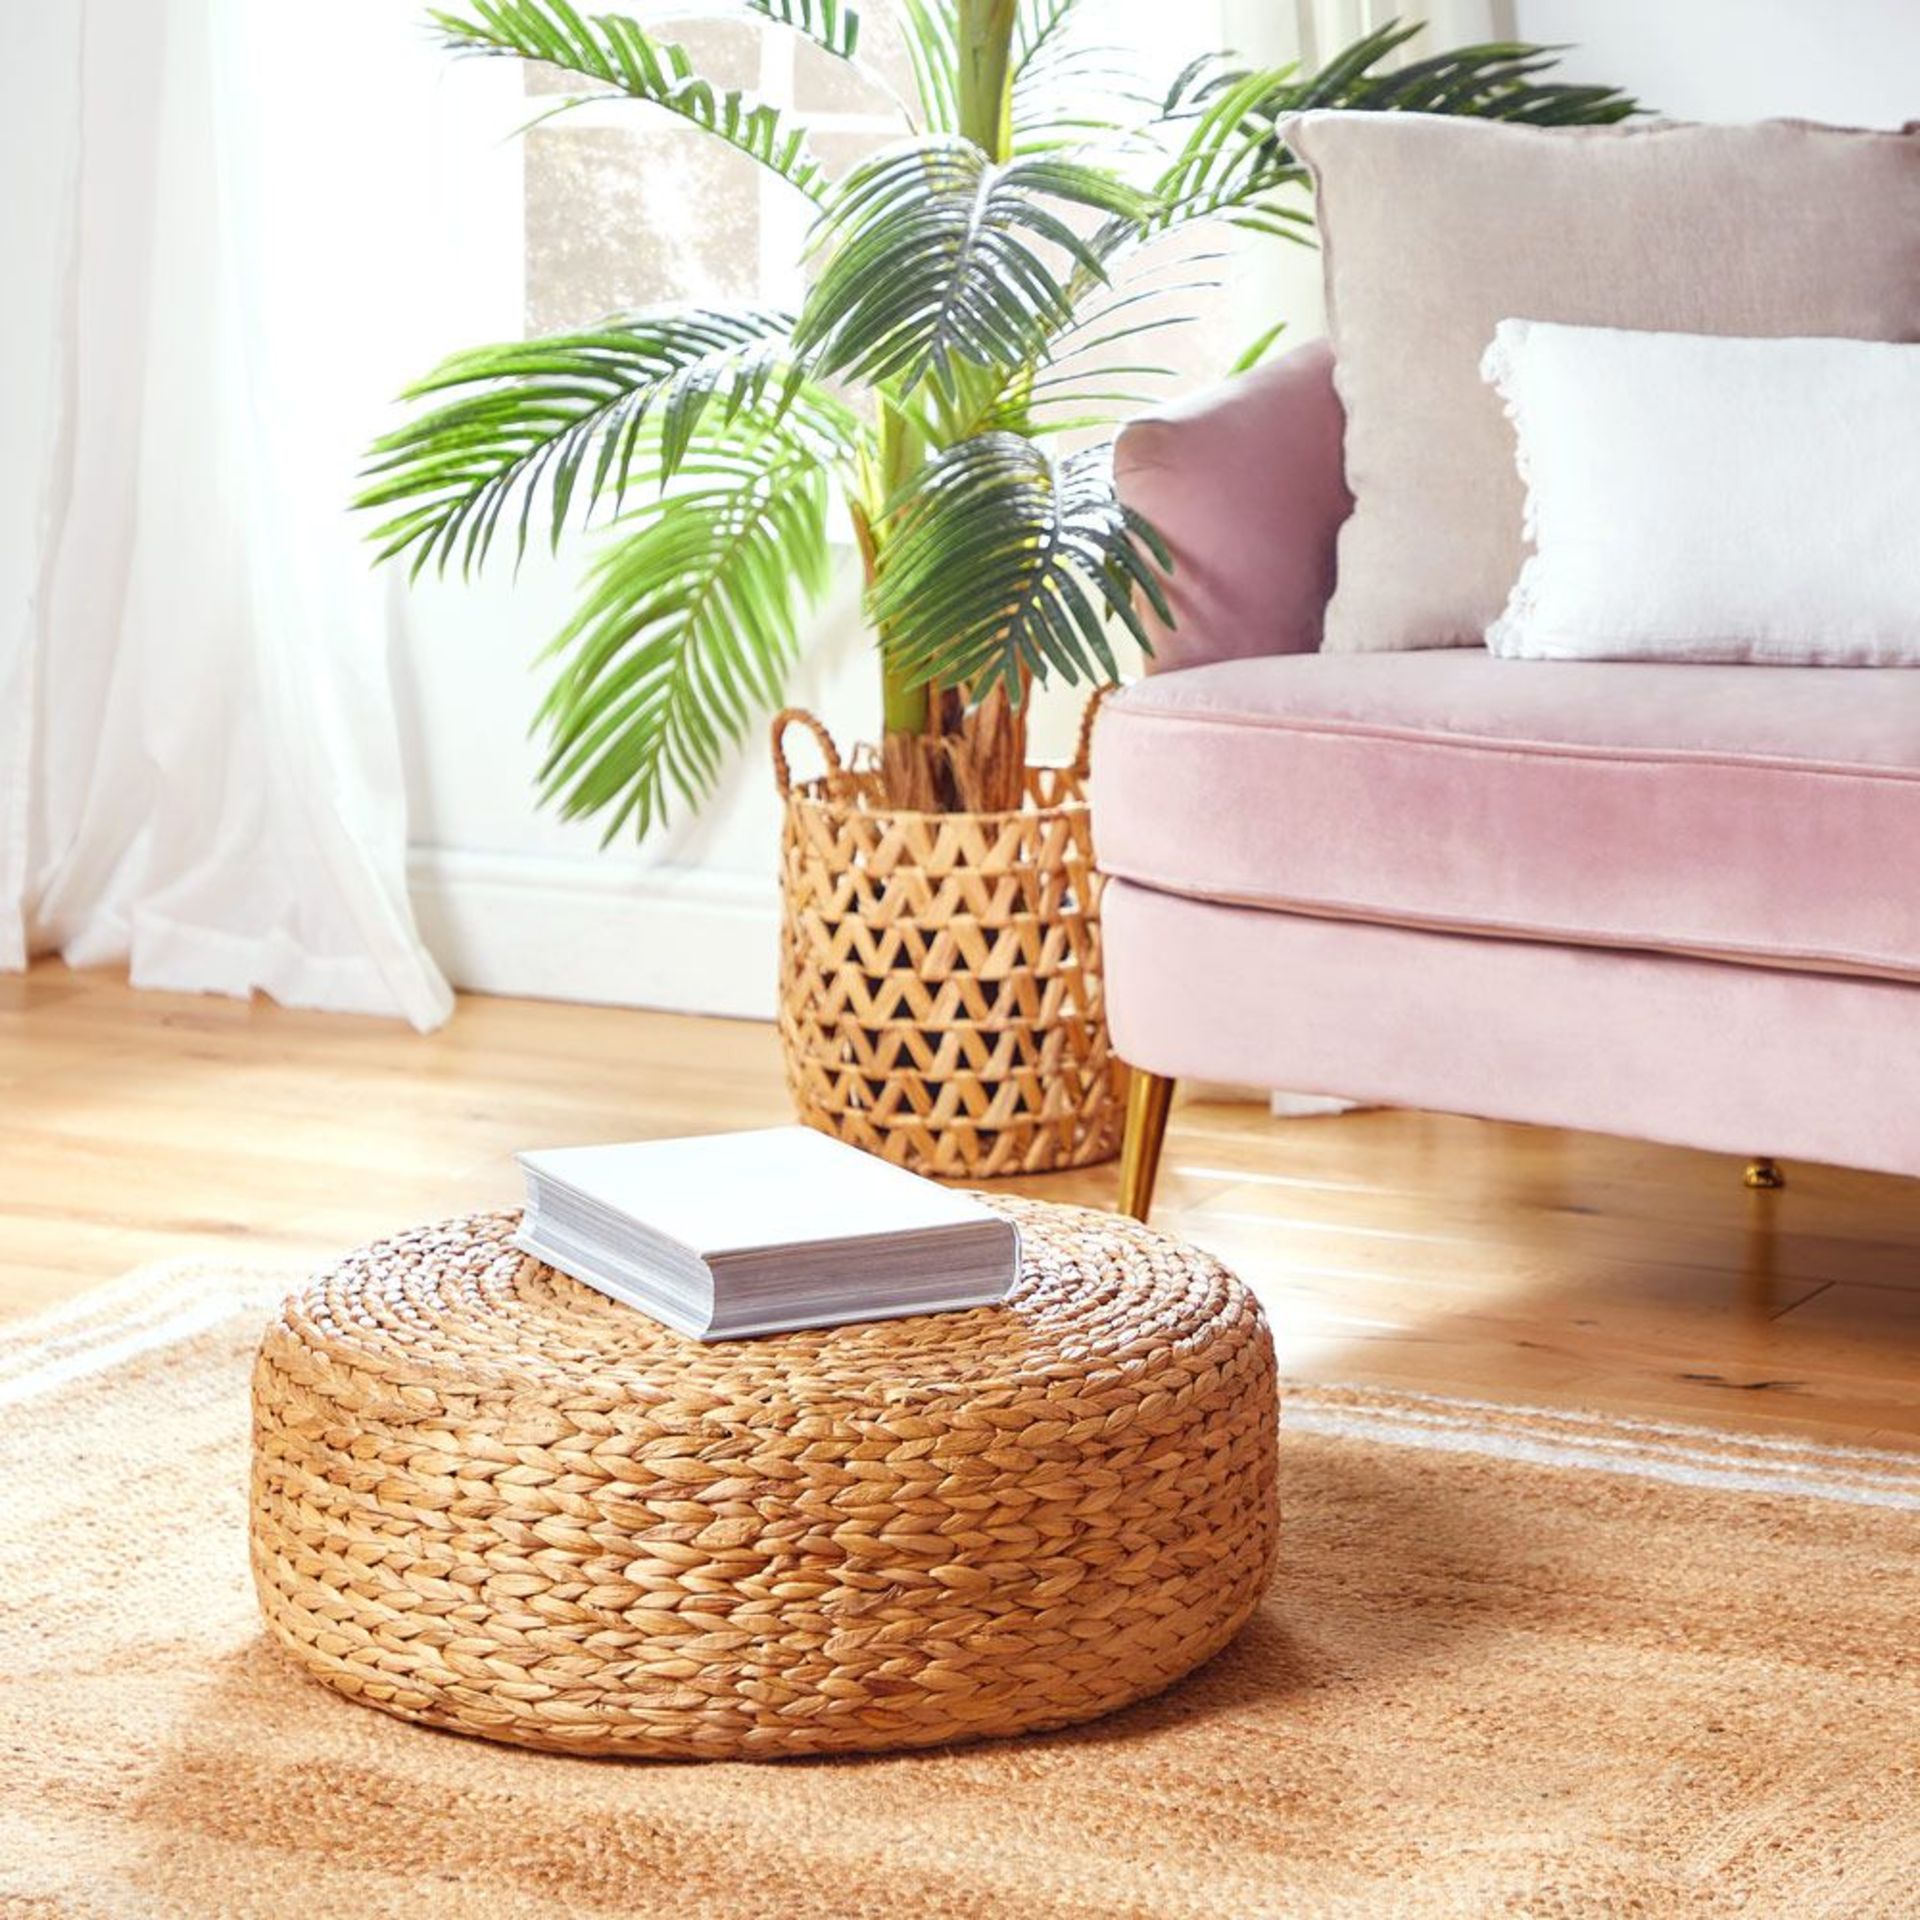 Water Hyacinth Stool. - S2. Refresh your home with our Water Hyacinth Stool, finished in a natural